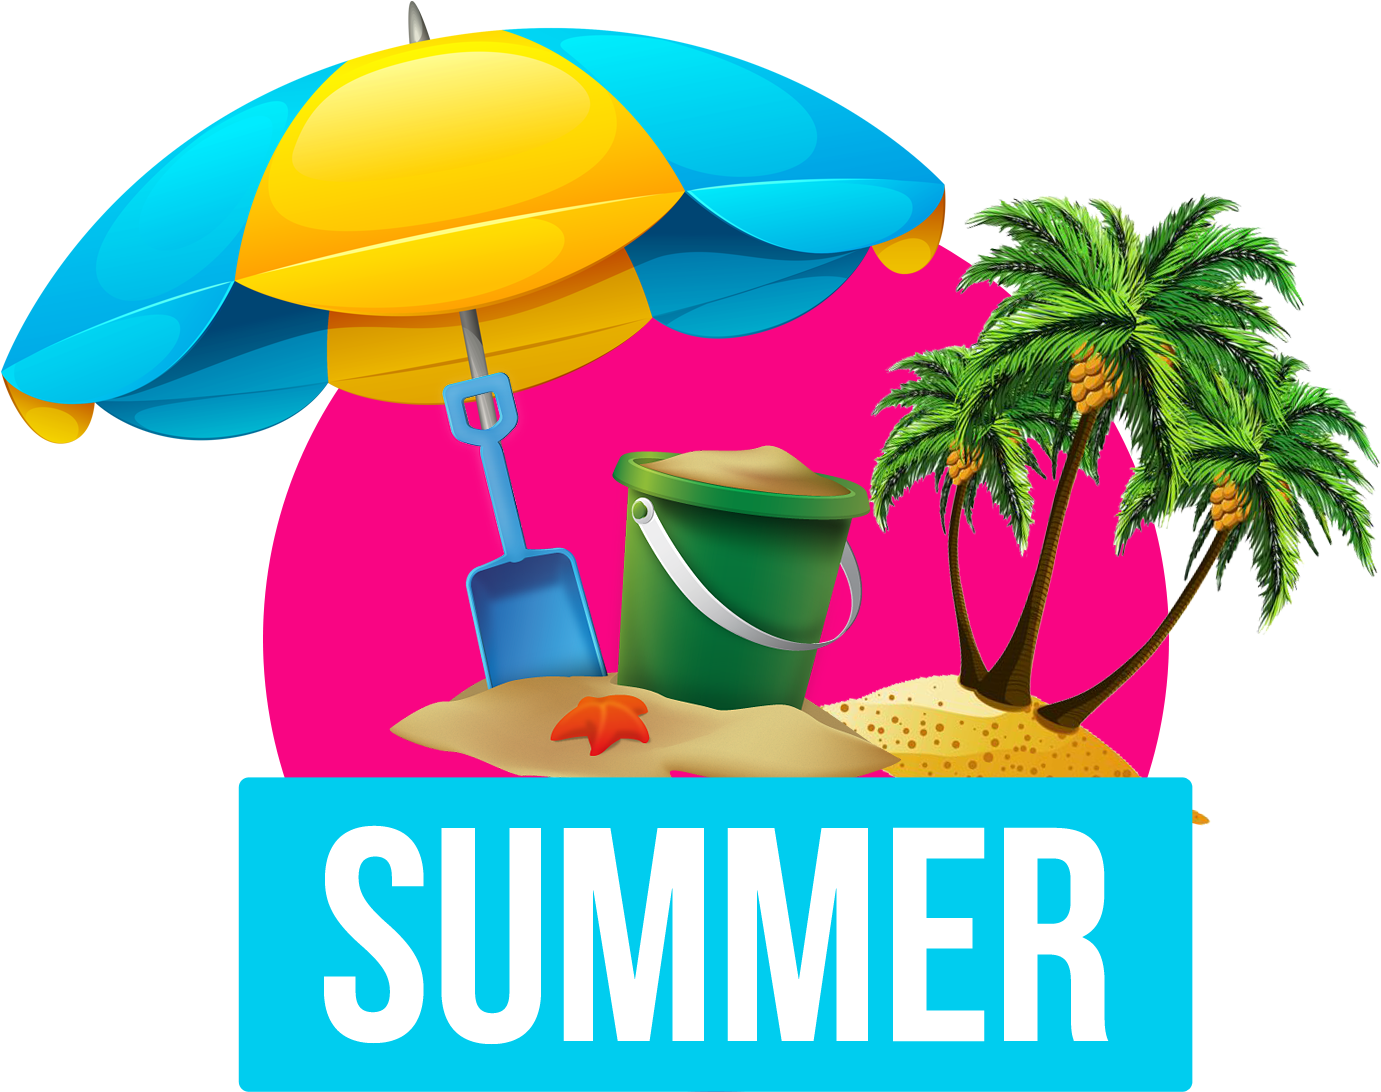 A Beach Umbrella And Bucket With Palm Trees